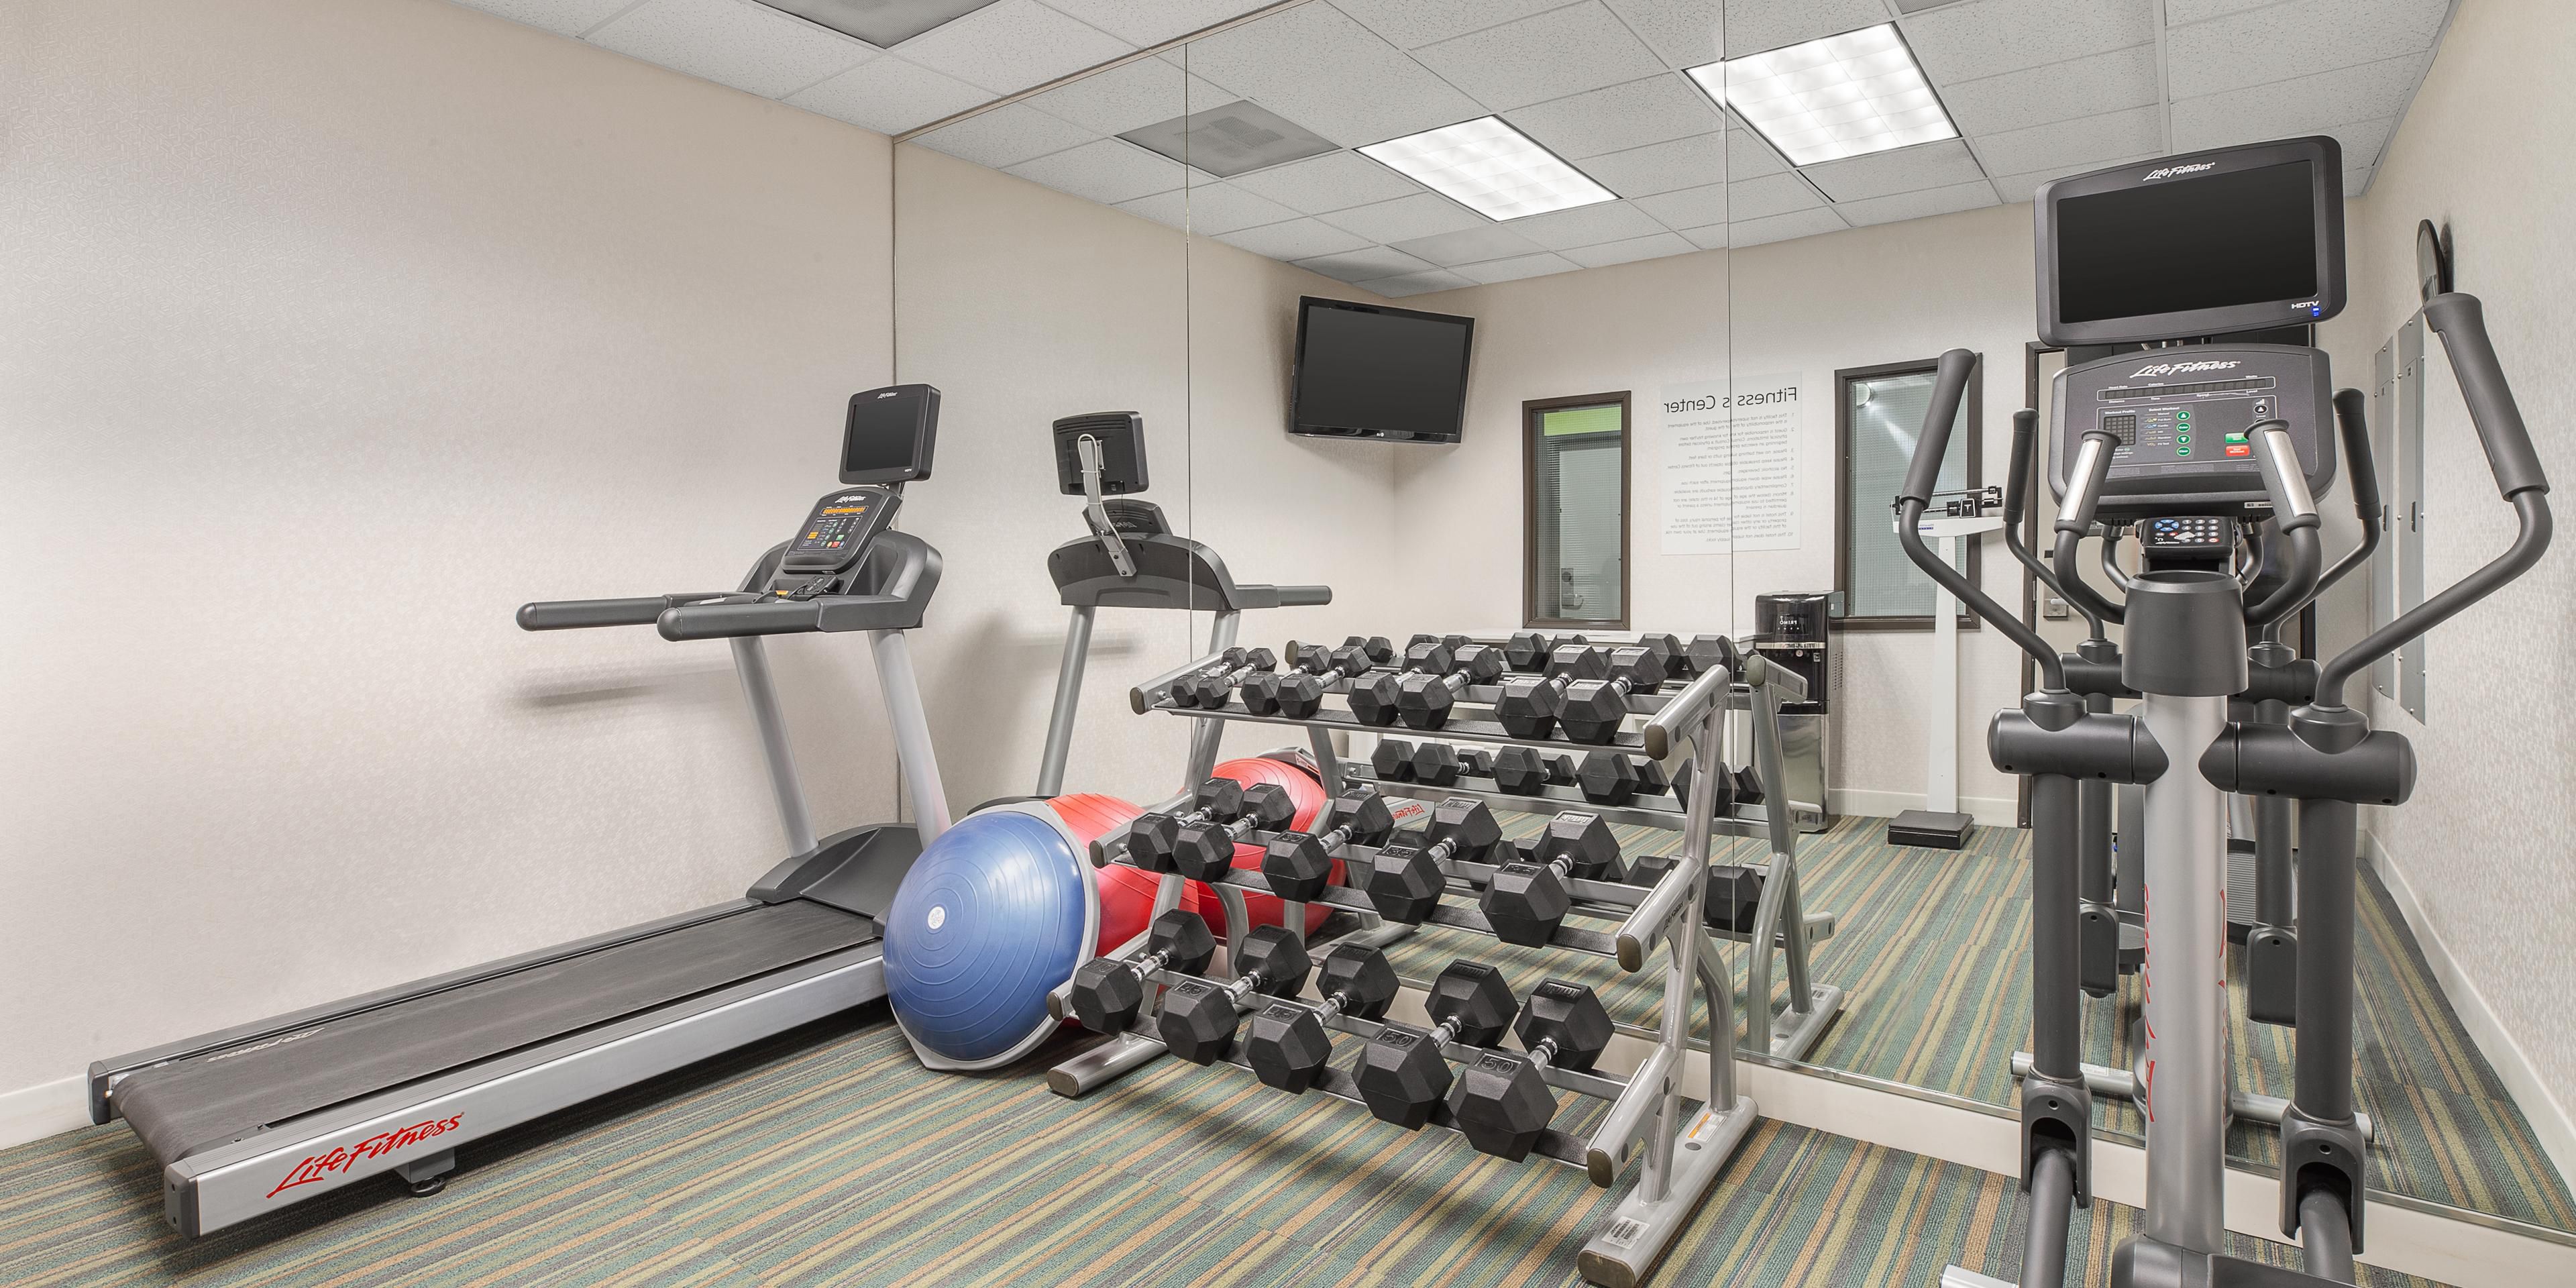 Our Fitness Center is open 24 hours and can provide you with free weights, dumbbells up to 35 pounds, an elliptical, and a treadmill. 